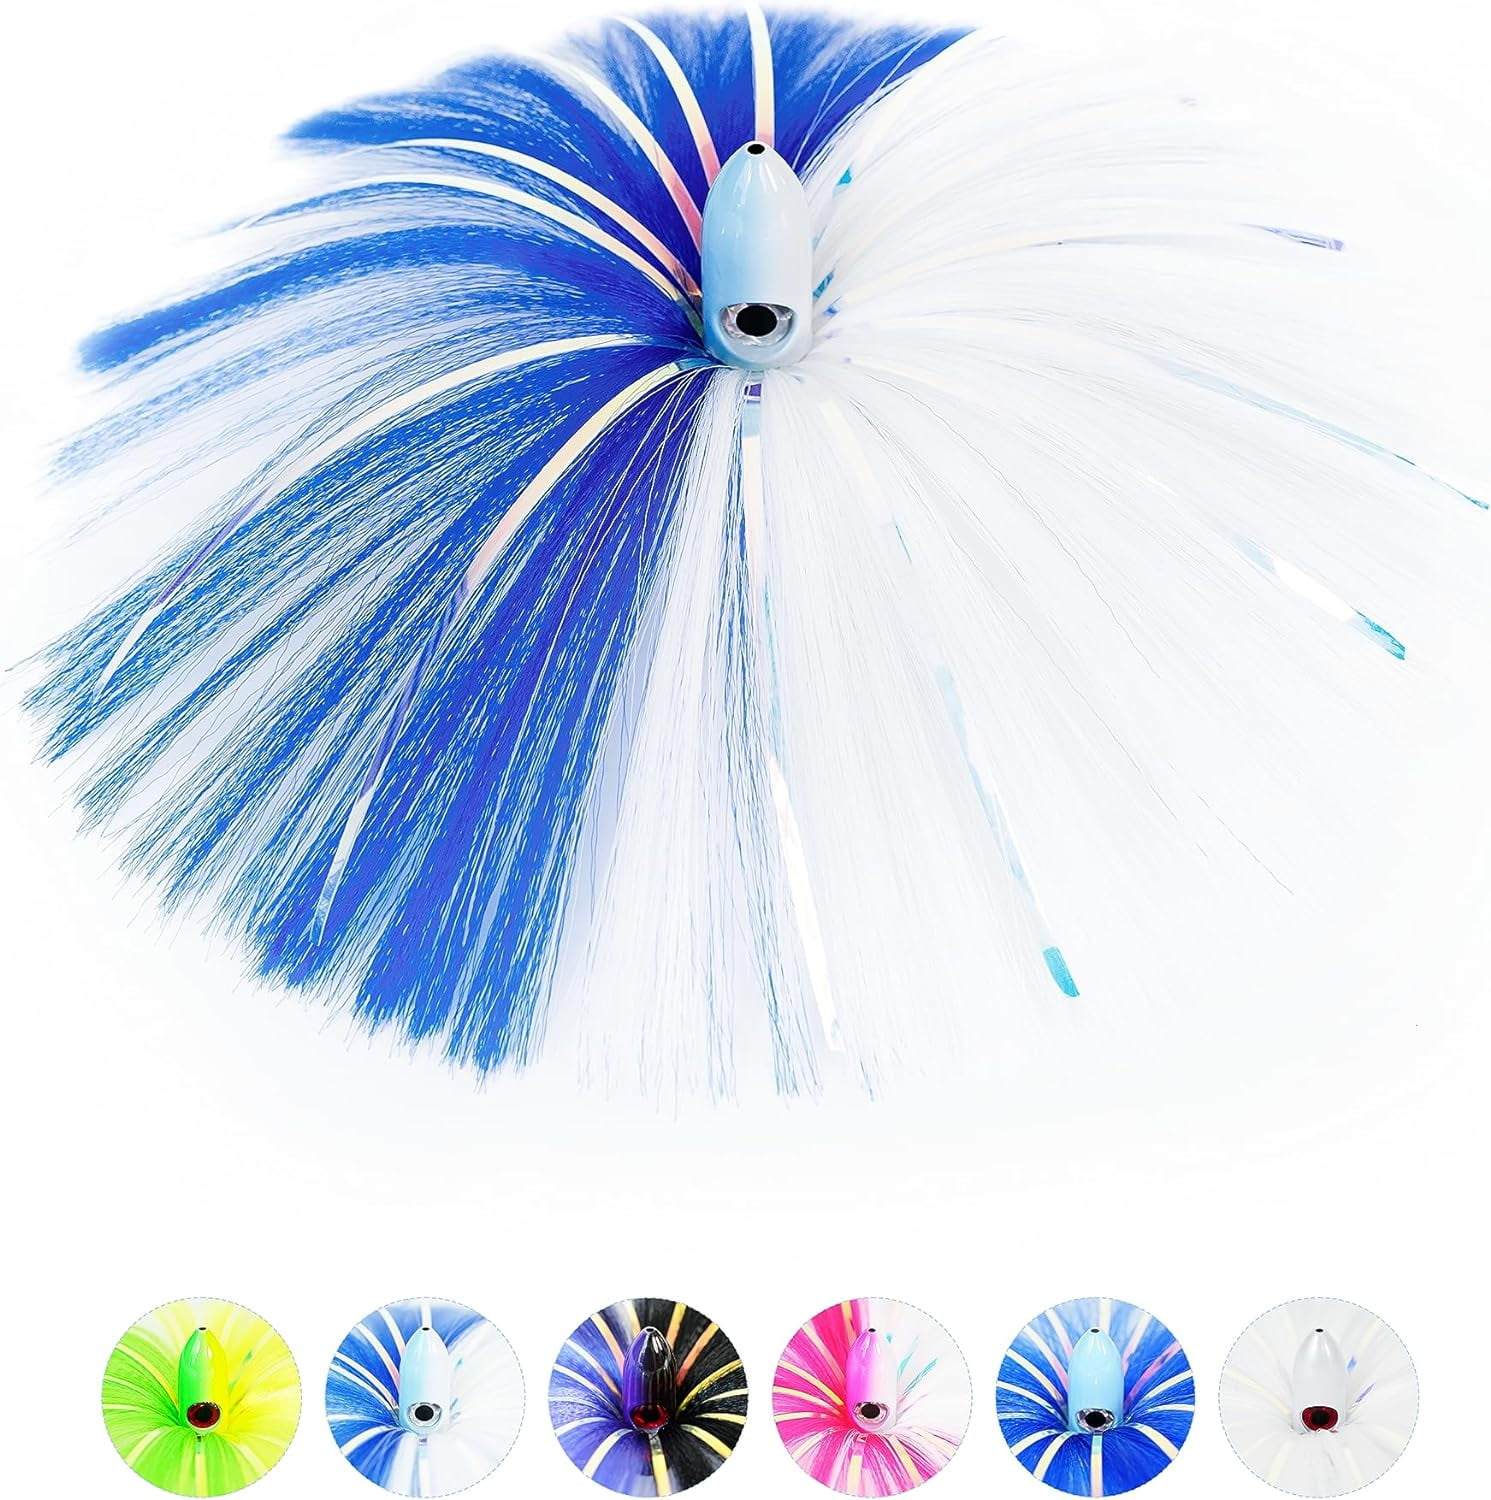 BLUEWING 1oz Sea Witch Lure with Lead Head Saltwater Fishing